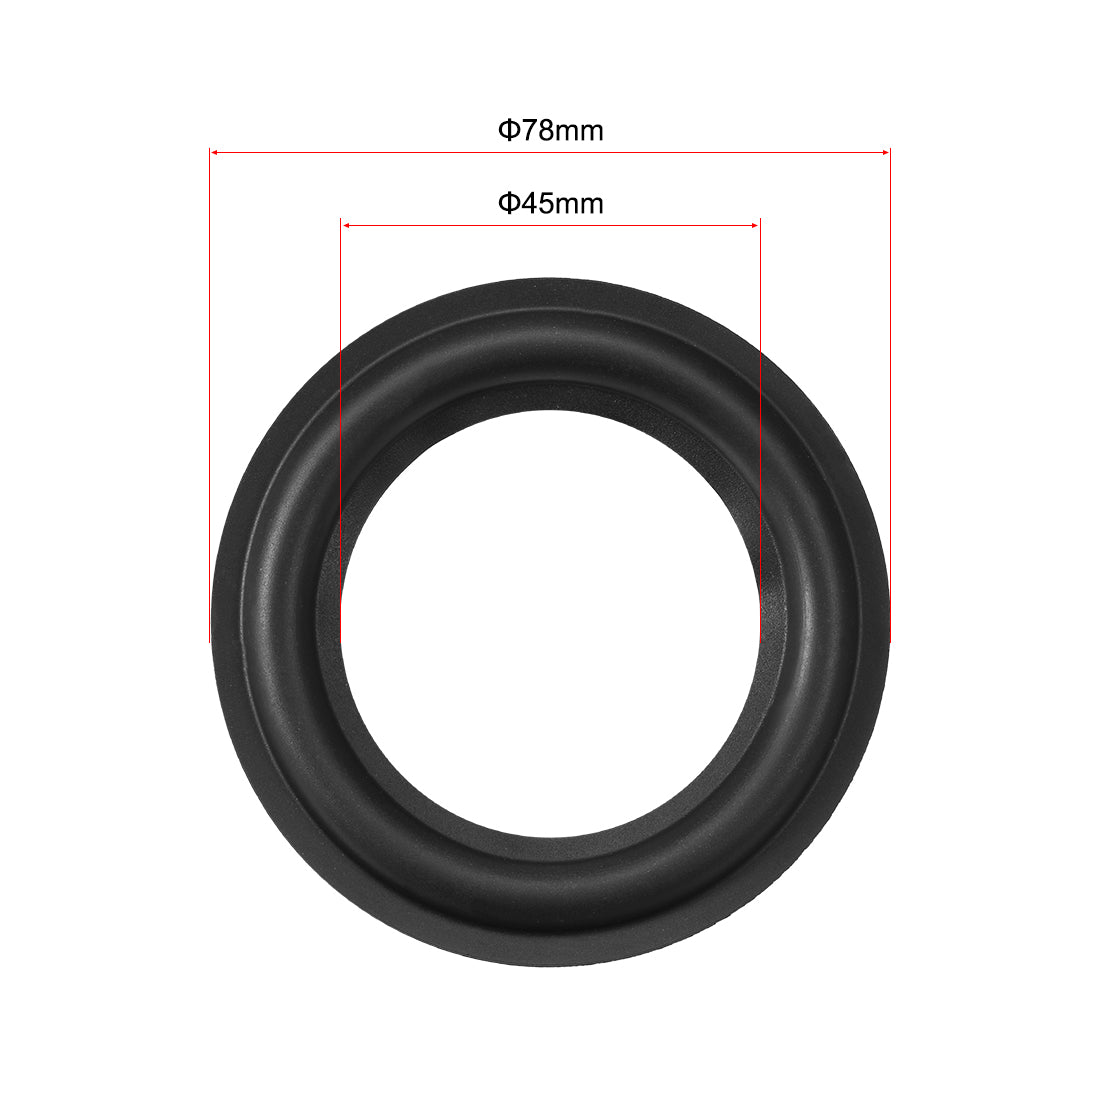 uxcell Uxcell 3inch Speaker Rubber Edge Surround Rings Replacement Parts for Speaker Repair or DIY 4pcs